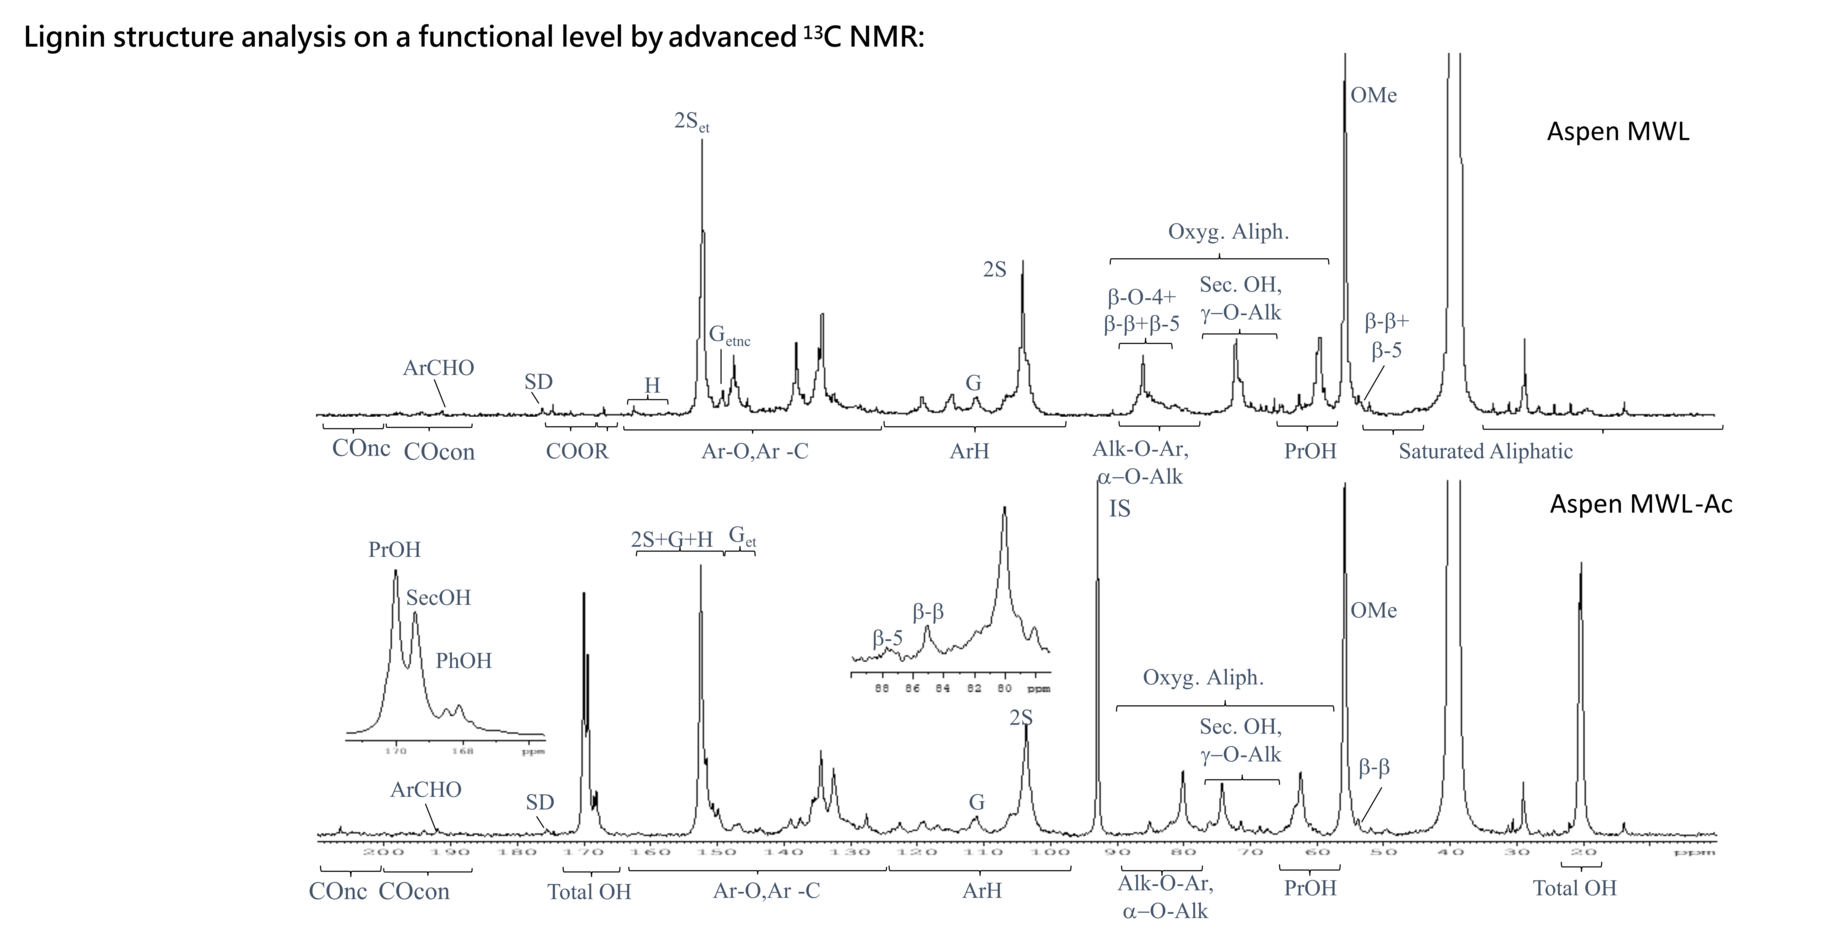 The image shows two 13C NMR spectra of aspen milled wood lignin